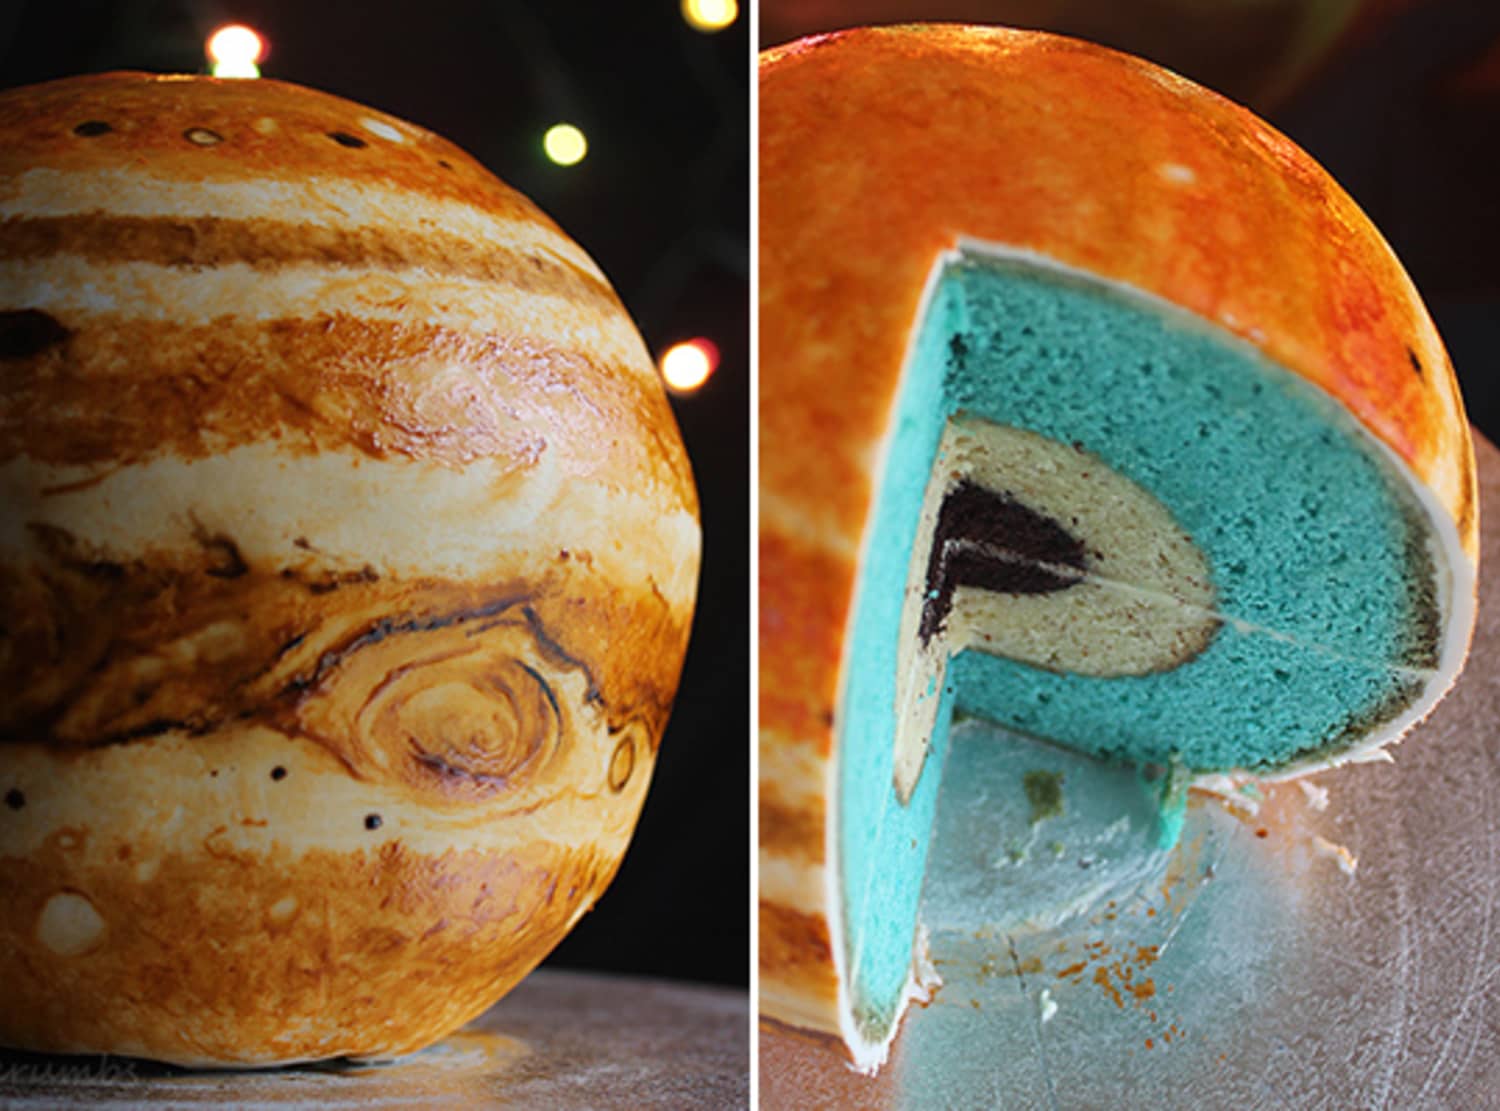 Baking For Geeks: Learn How To Make a Cake That Looks Like Jupiter